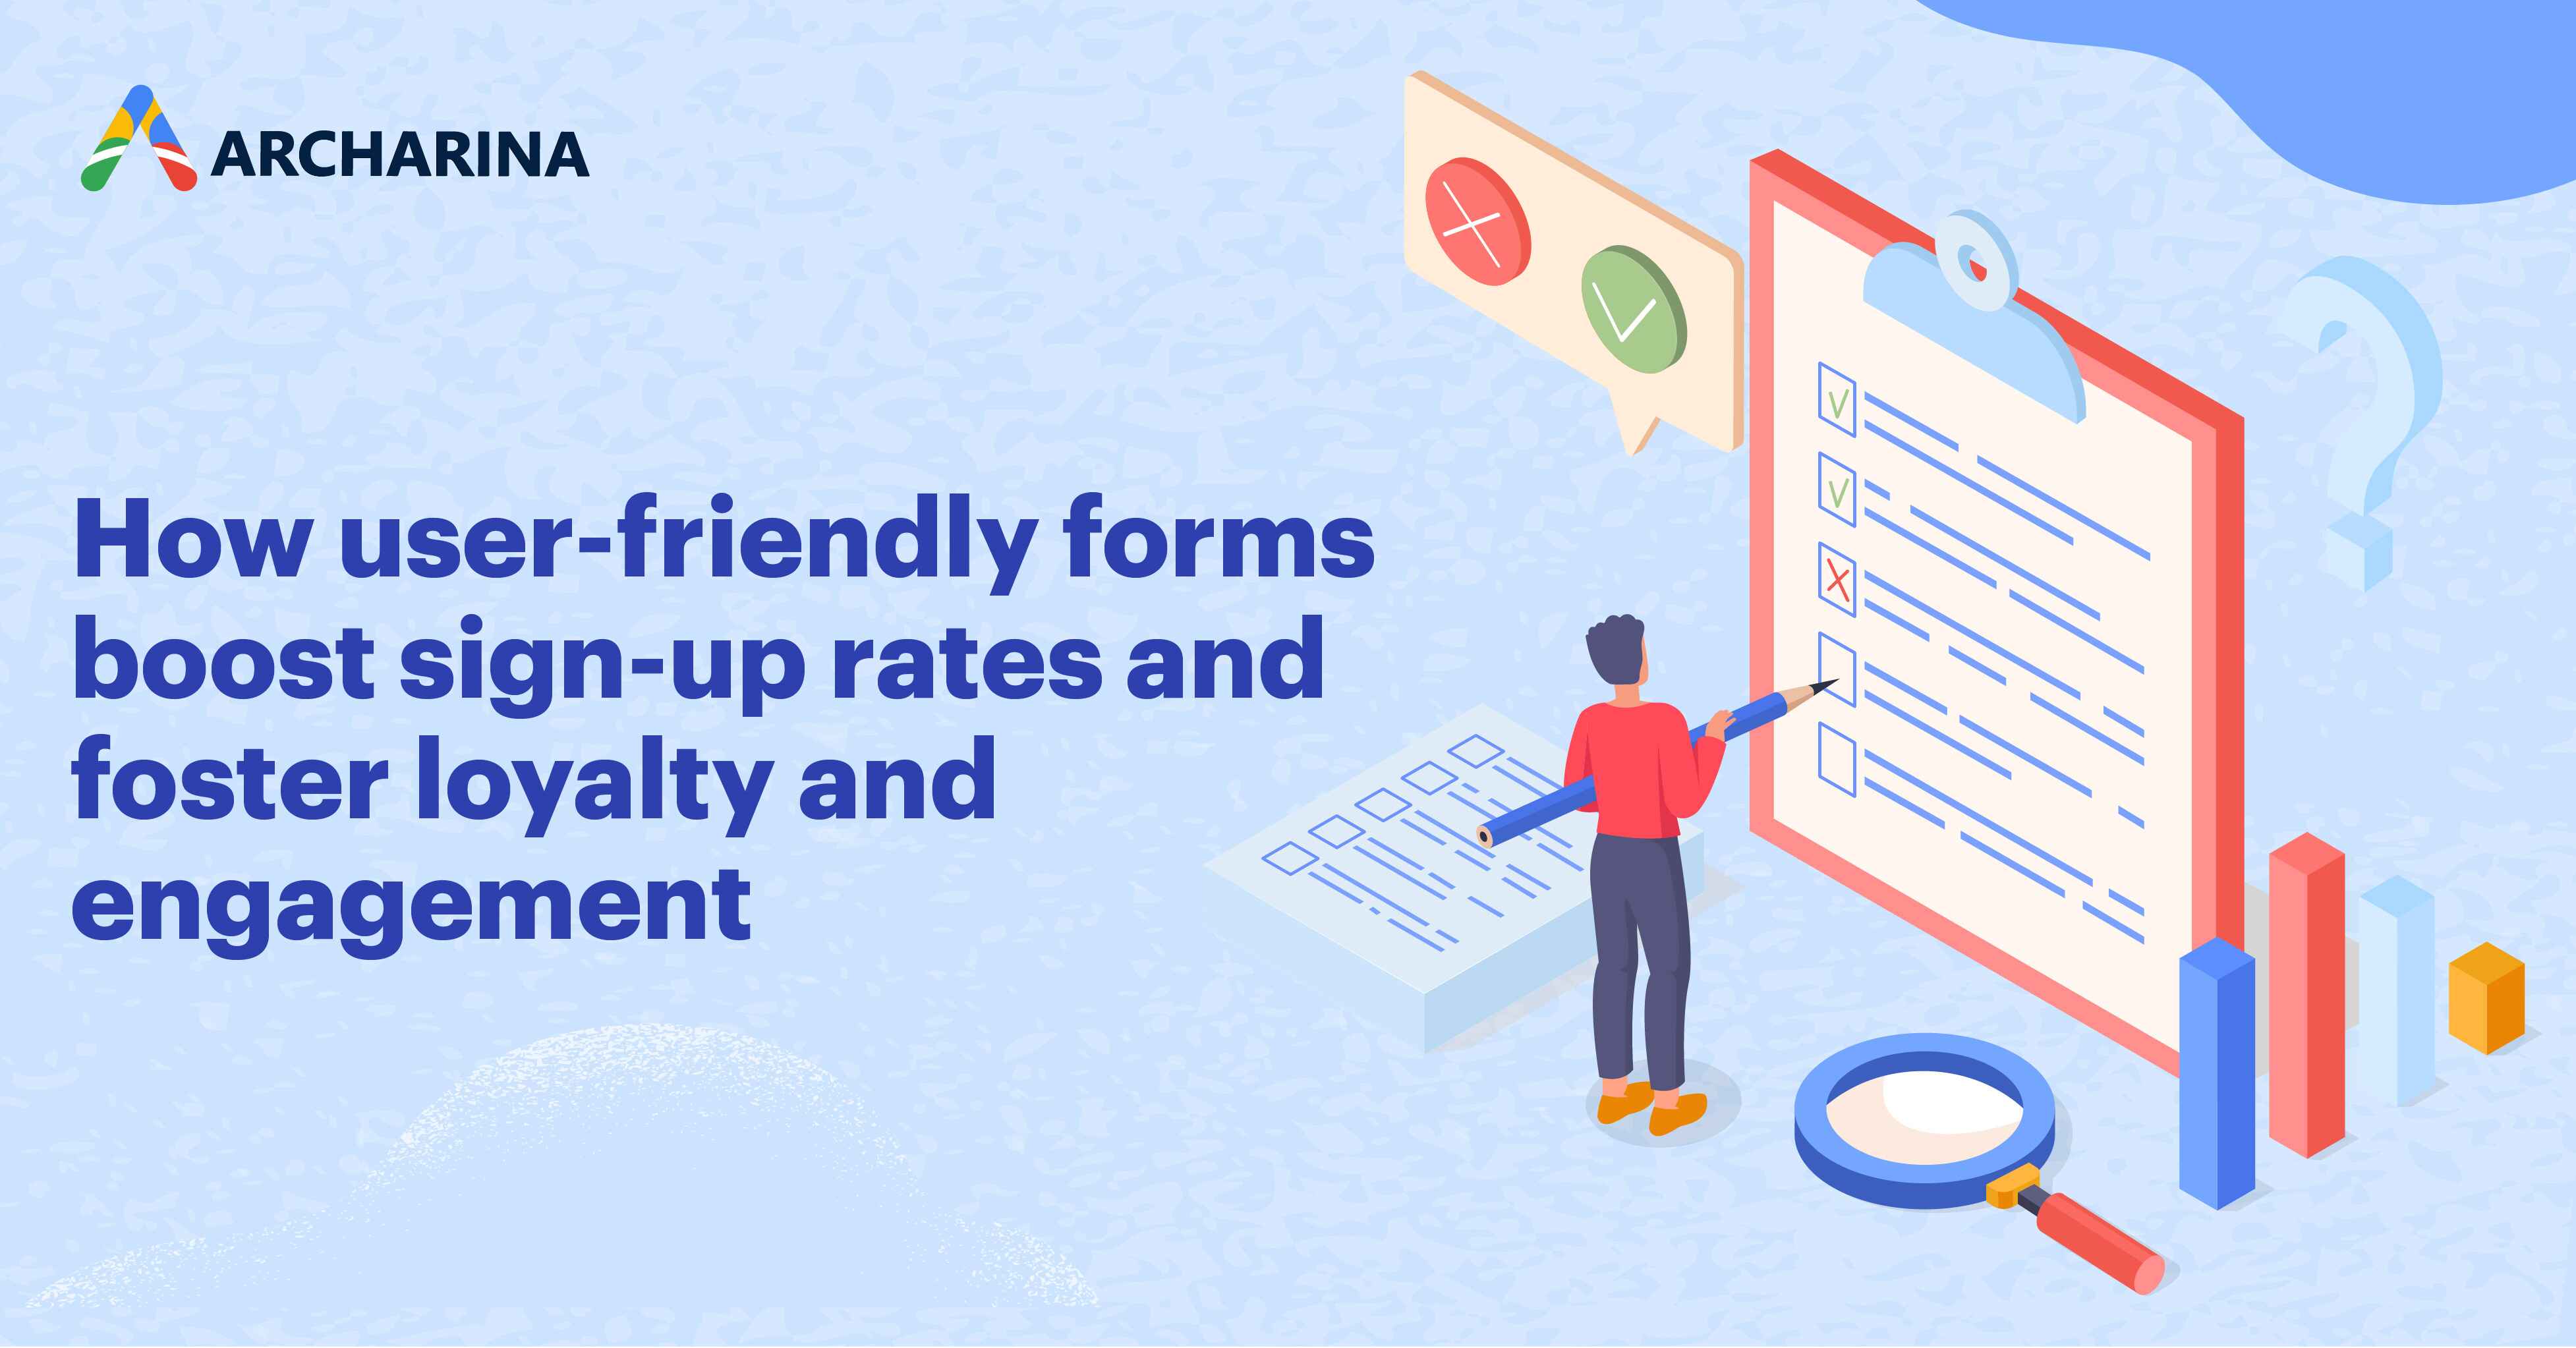 How user-friendly forms boost sign-up rates and foster loyalty and engagement